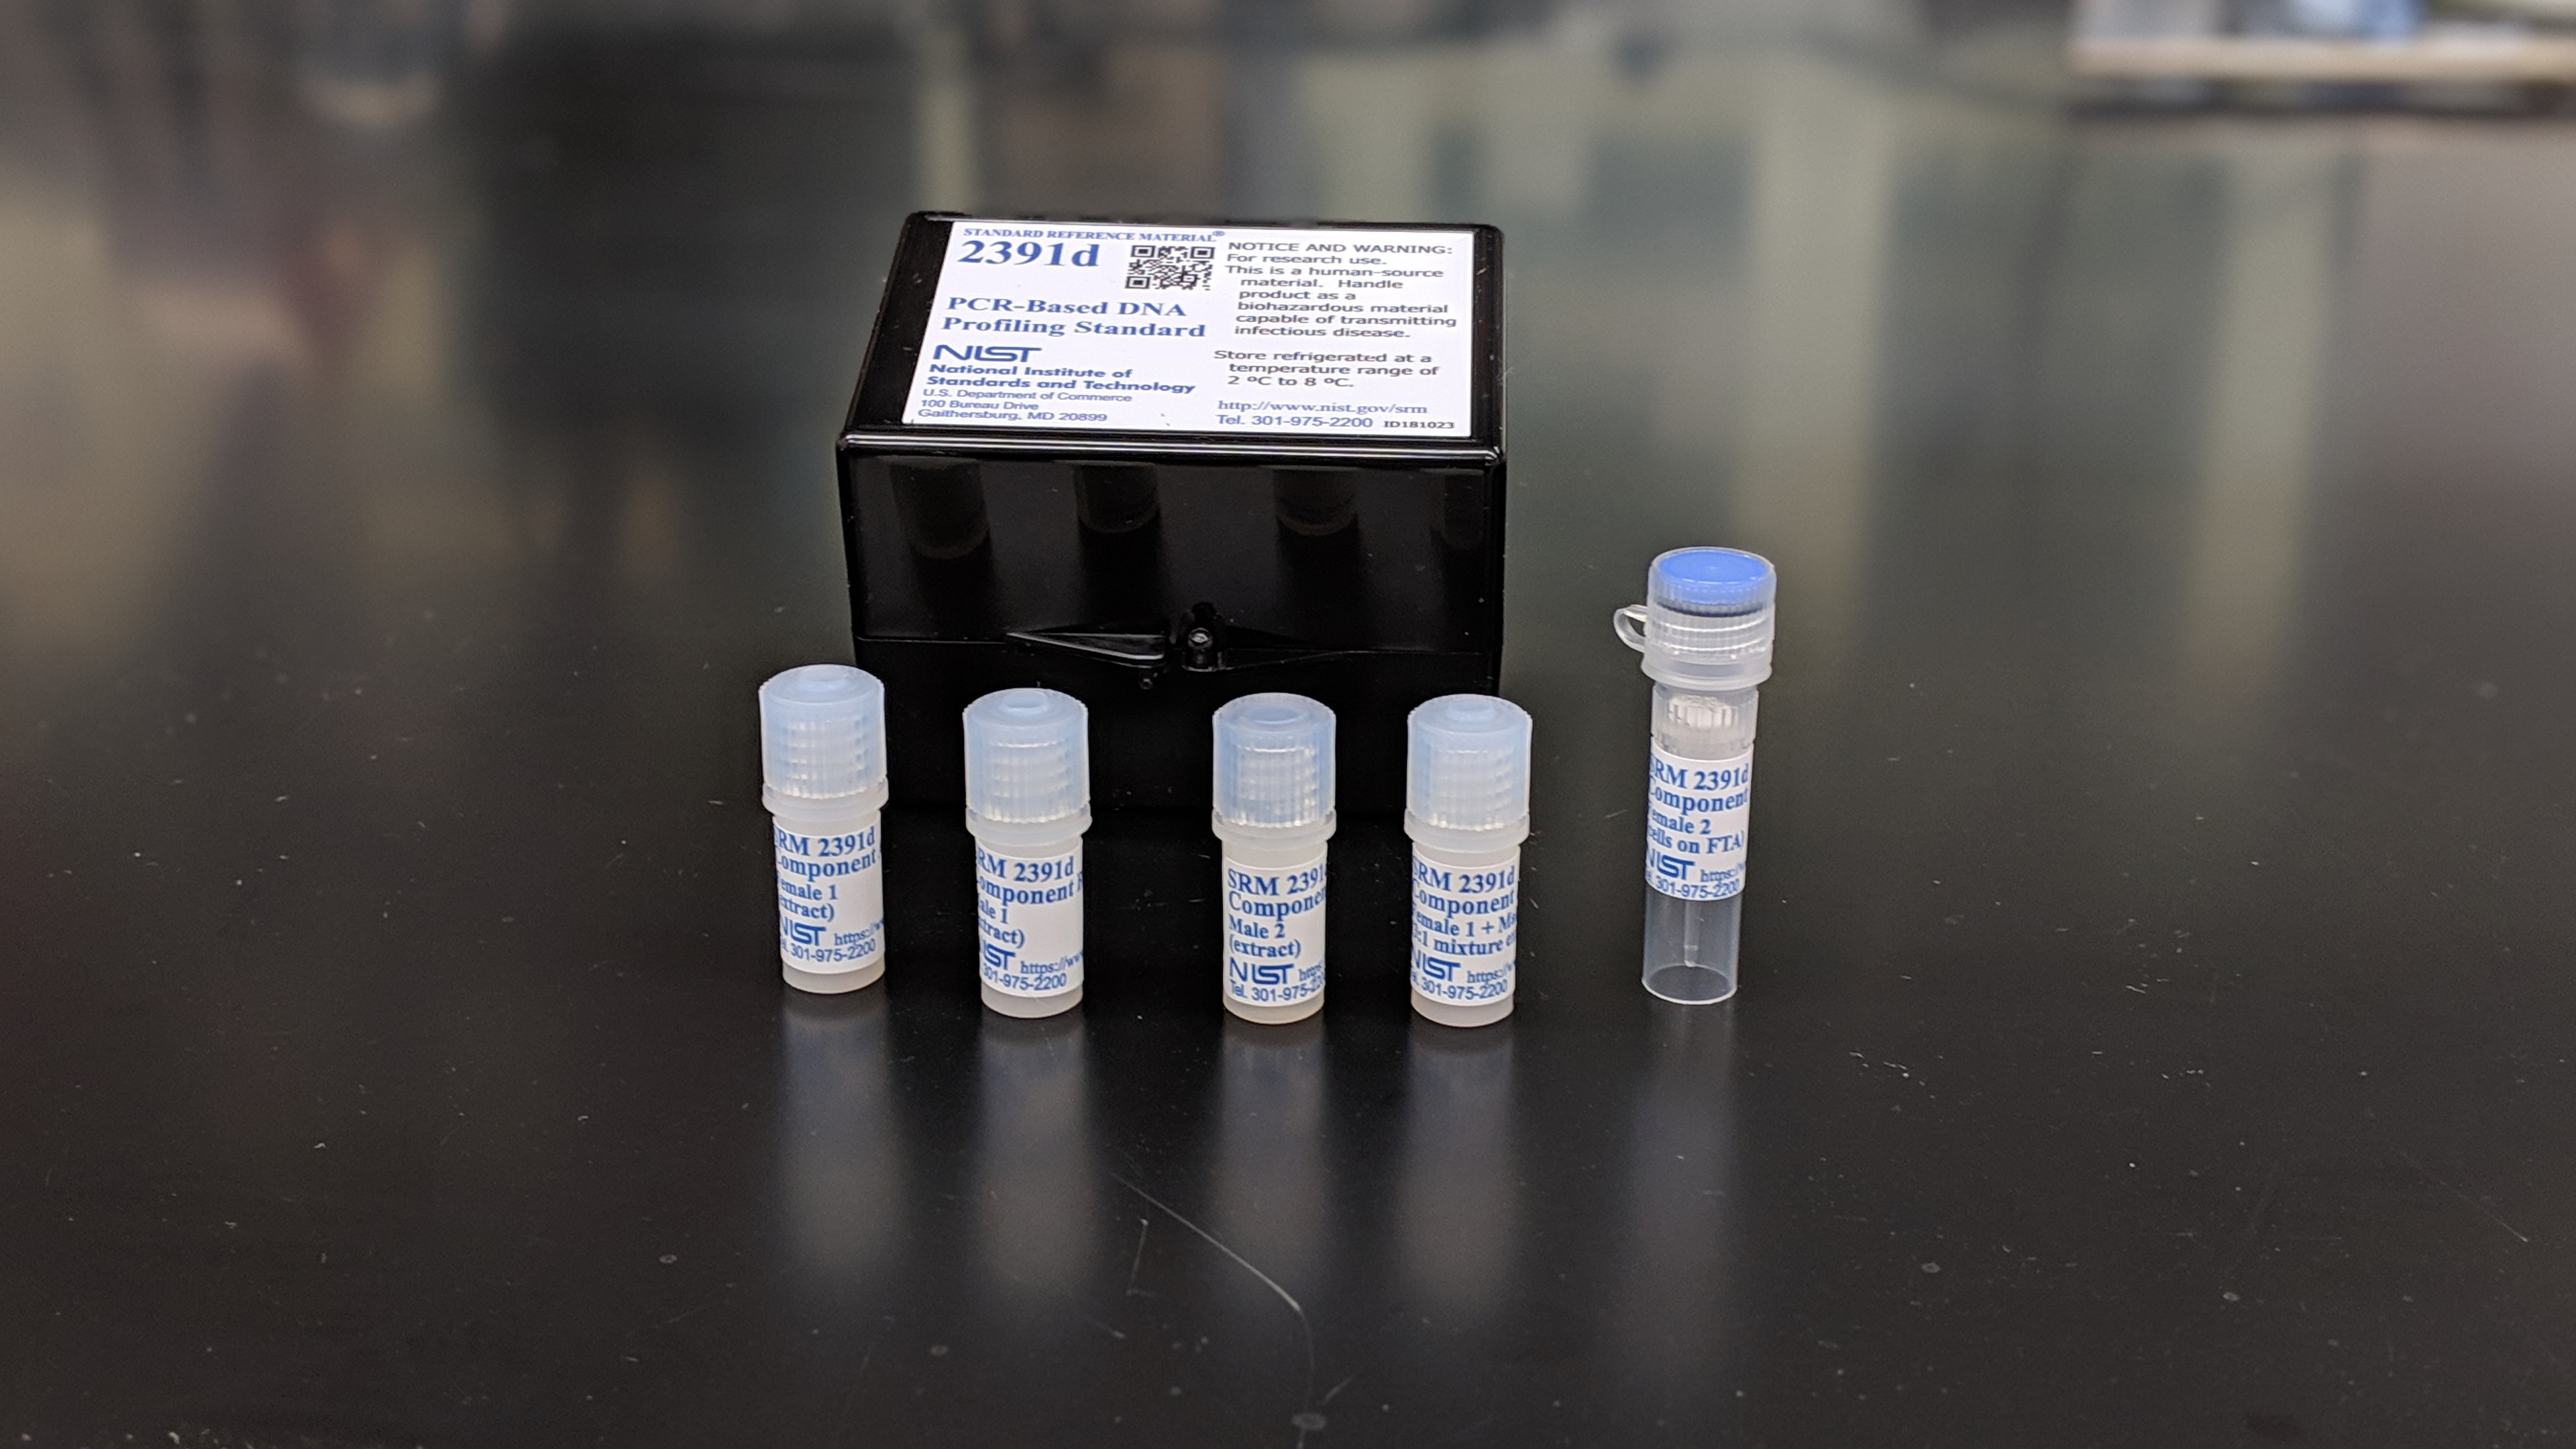 portrait of five plastic vials on a table. There is a black box behind them that reads "2391d PCR-Based DNA profiling standard."